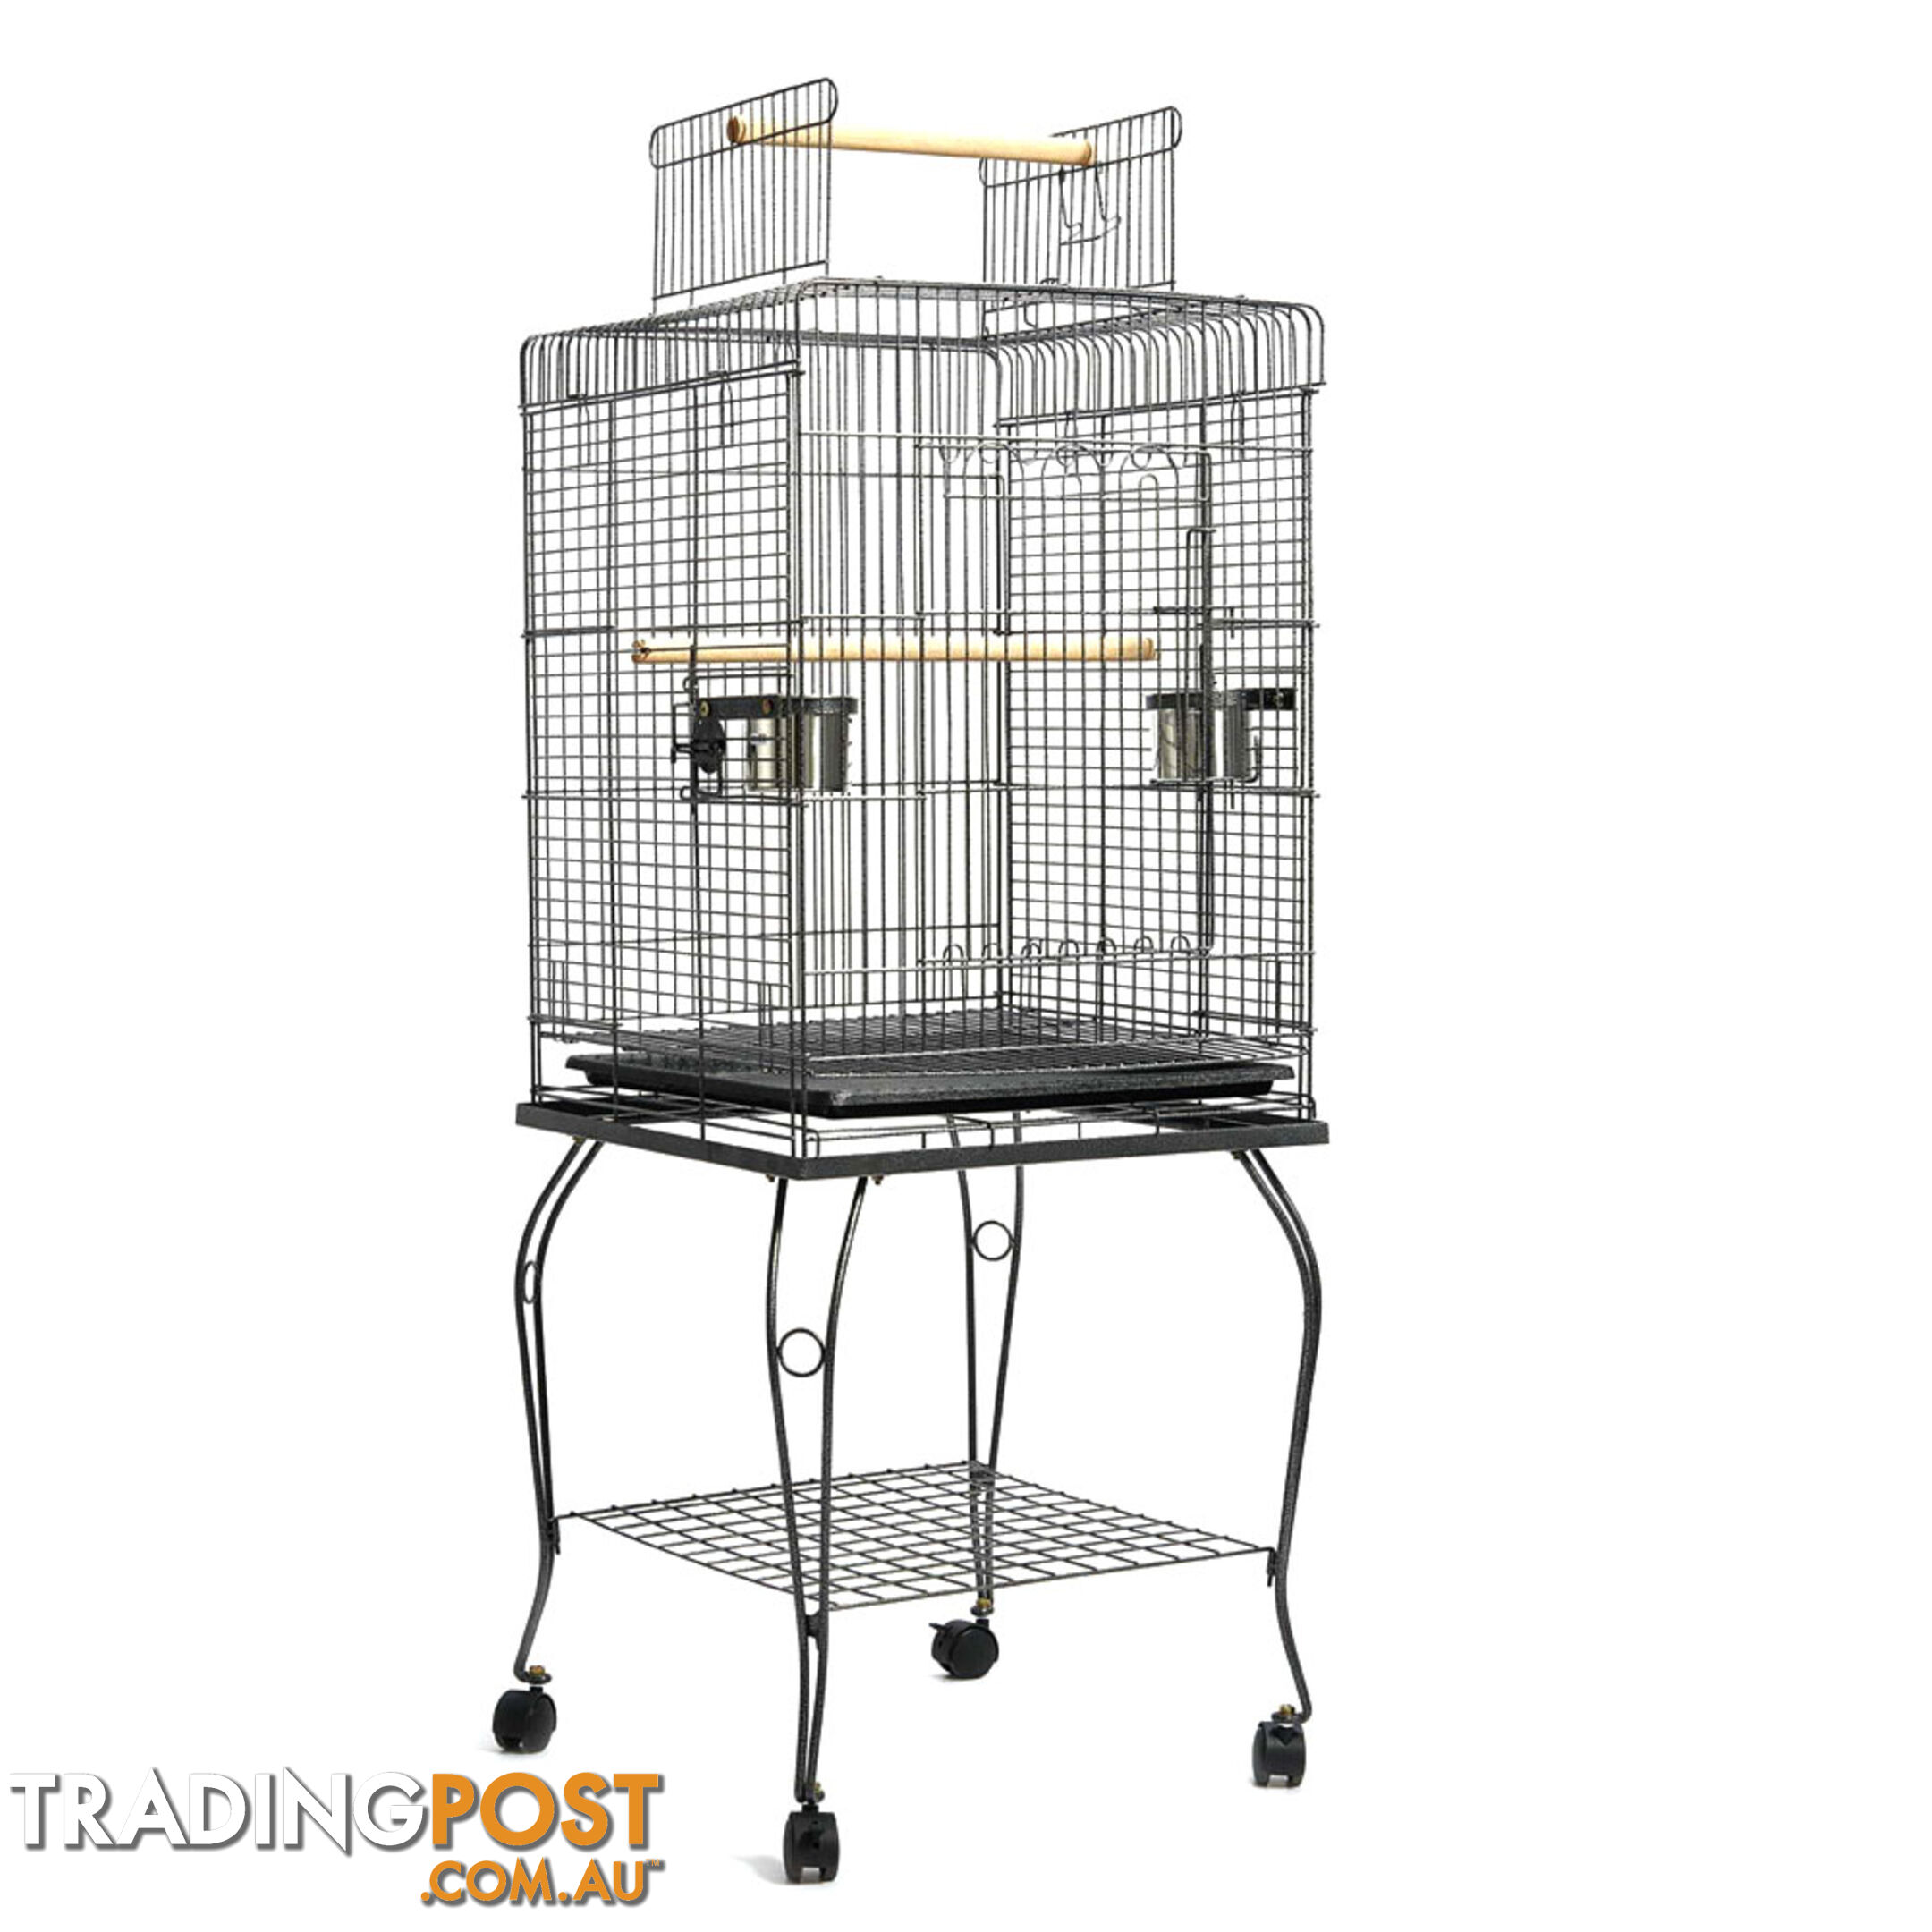 New 145cm Bird Cage Canary Parrot Budgie Pet Aviary Stand Wheel Open Roof Black